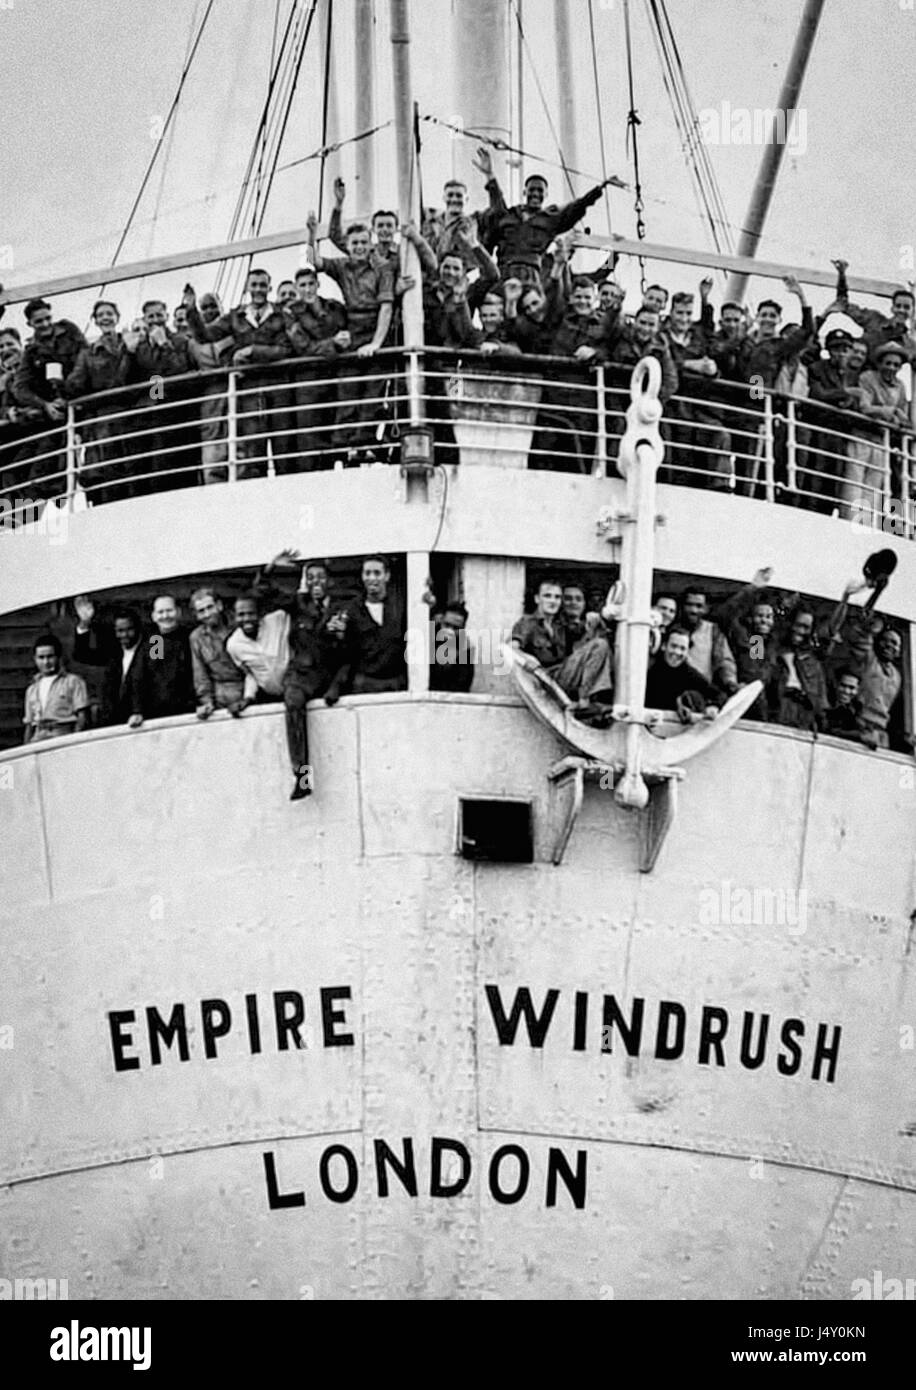 Empire Windrush packed with West Indian immigrants on arrival at the Port of Tilbury on the River Thames on 22 June 1948. This event is often cited as the start of the postwar immigration boom that was to change British society forever. The British Nationality Act 1948 gave British citizenship to all people living in Commonwealth countries with full rights of entry and settlement in Britain. Stock Photo